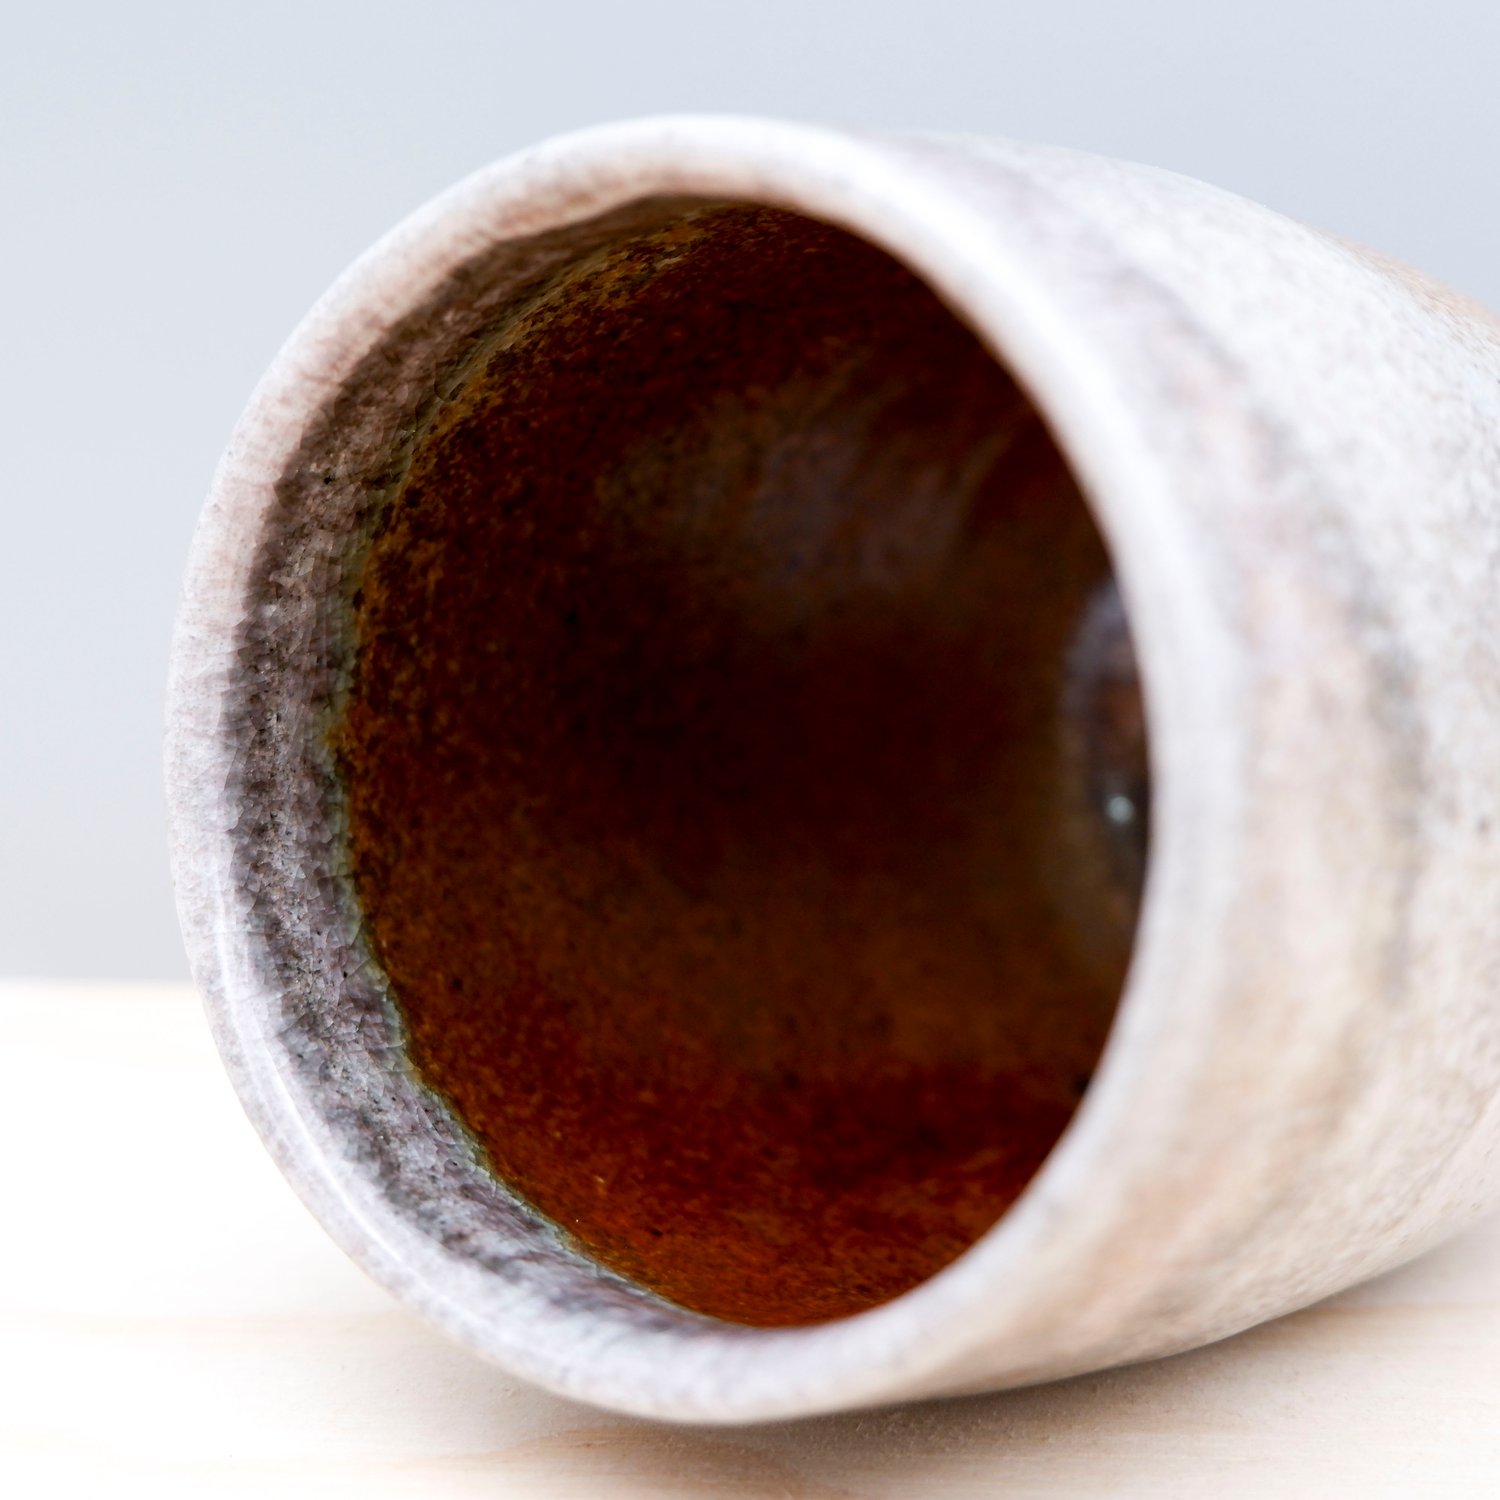 Image of Soda Fired Cup (dimple)